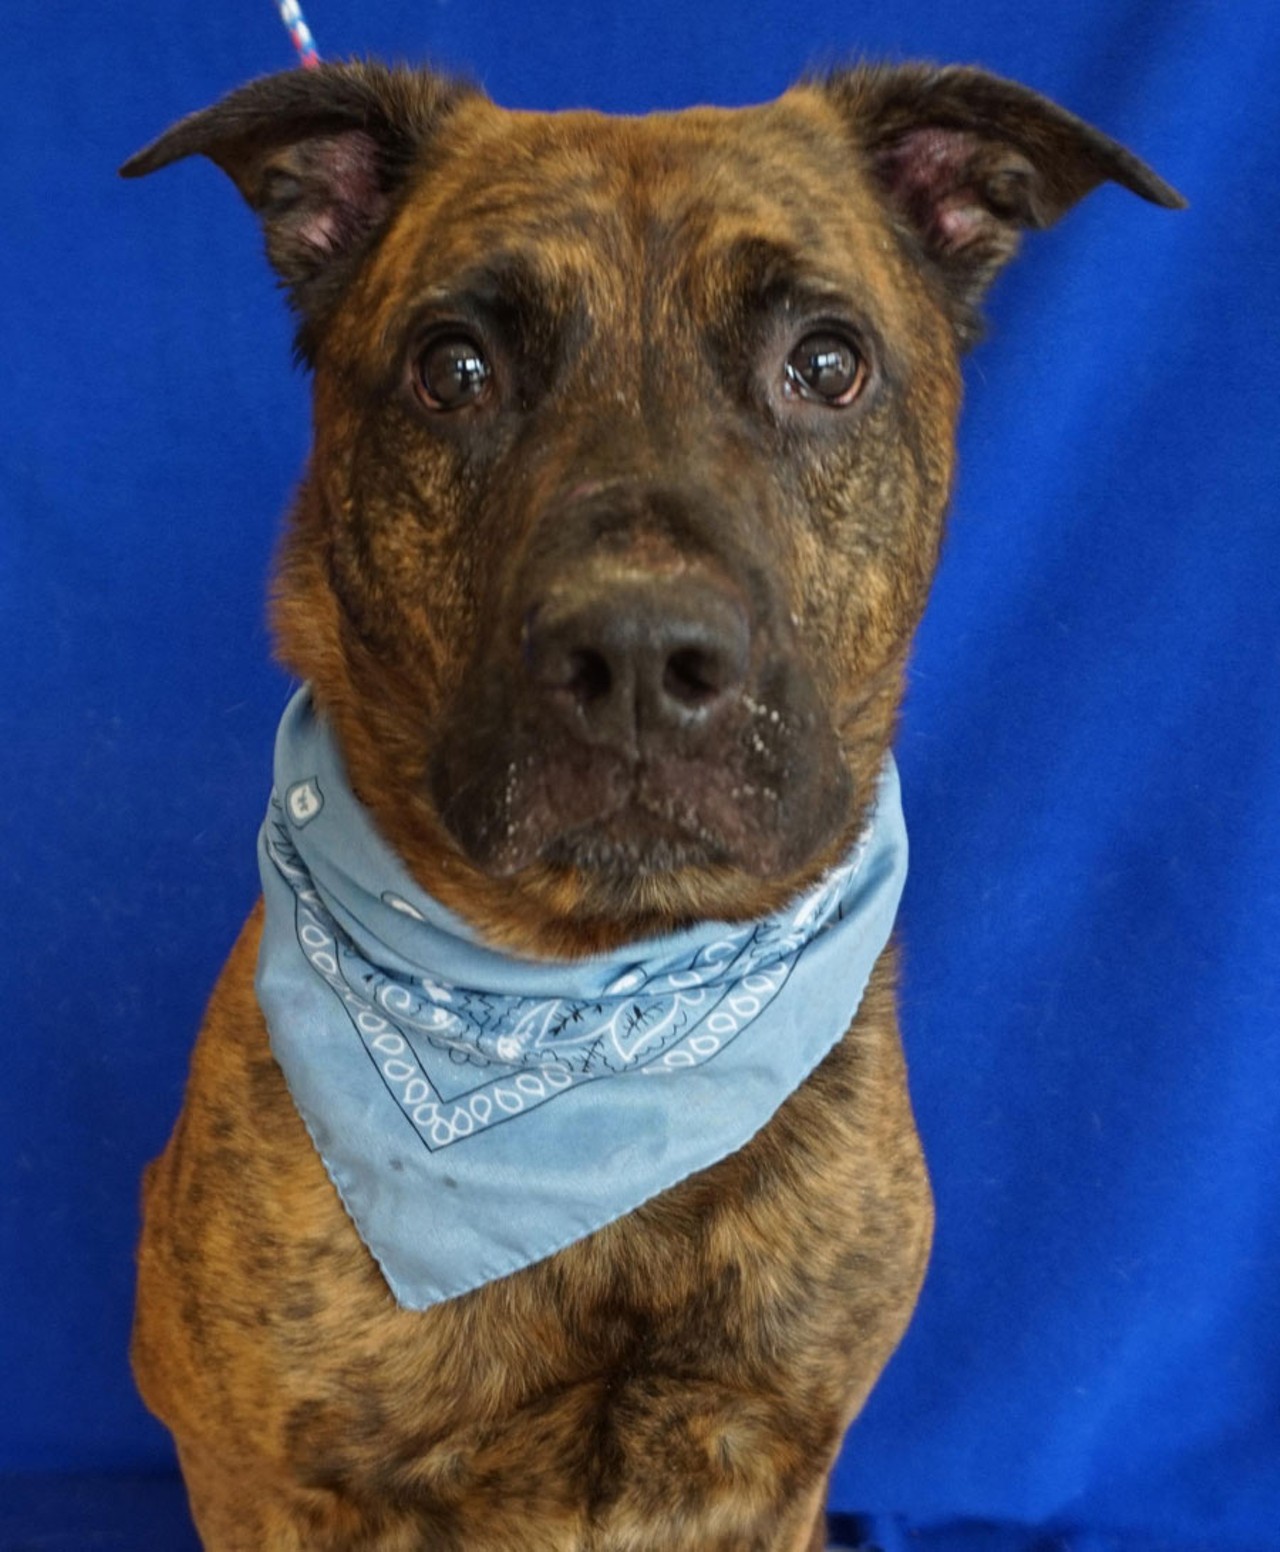 NAME: Buddy
GENDER: Male
BREED: Shepherd-Labrador mix
AGE: 6 years
WEIGHT: 60 pounds
SPECIAL CONSIDERATIONS: May prefer a home without children
REASON I CAME TO MHS: Agency transfer
LOCATION: Rochester Hills Center for Animal Care
ID NUMBER: 865838